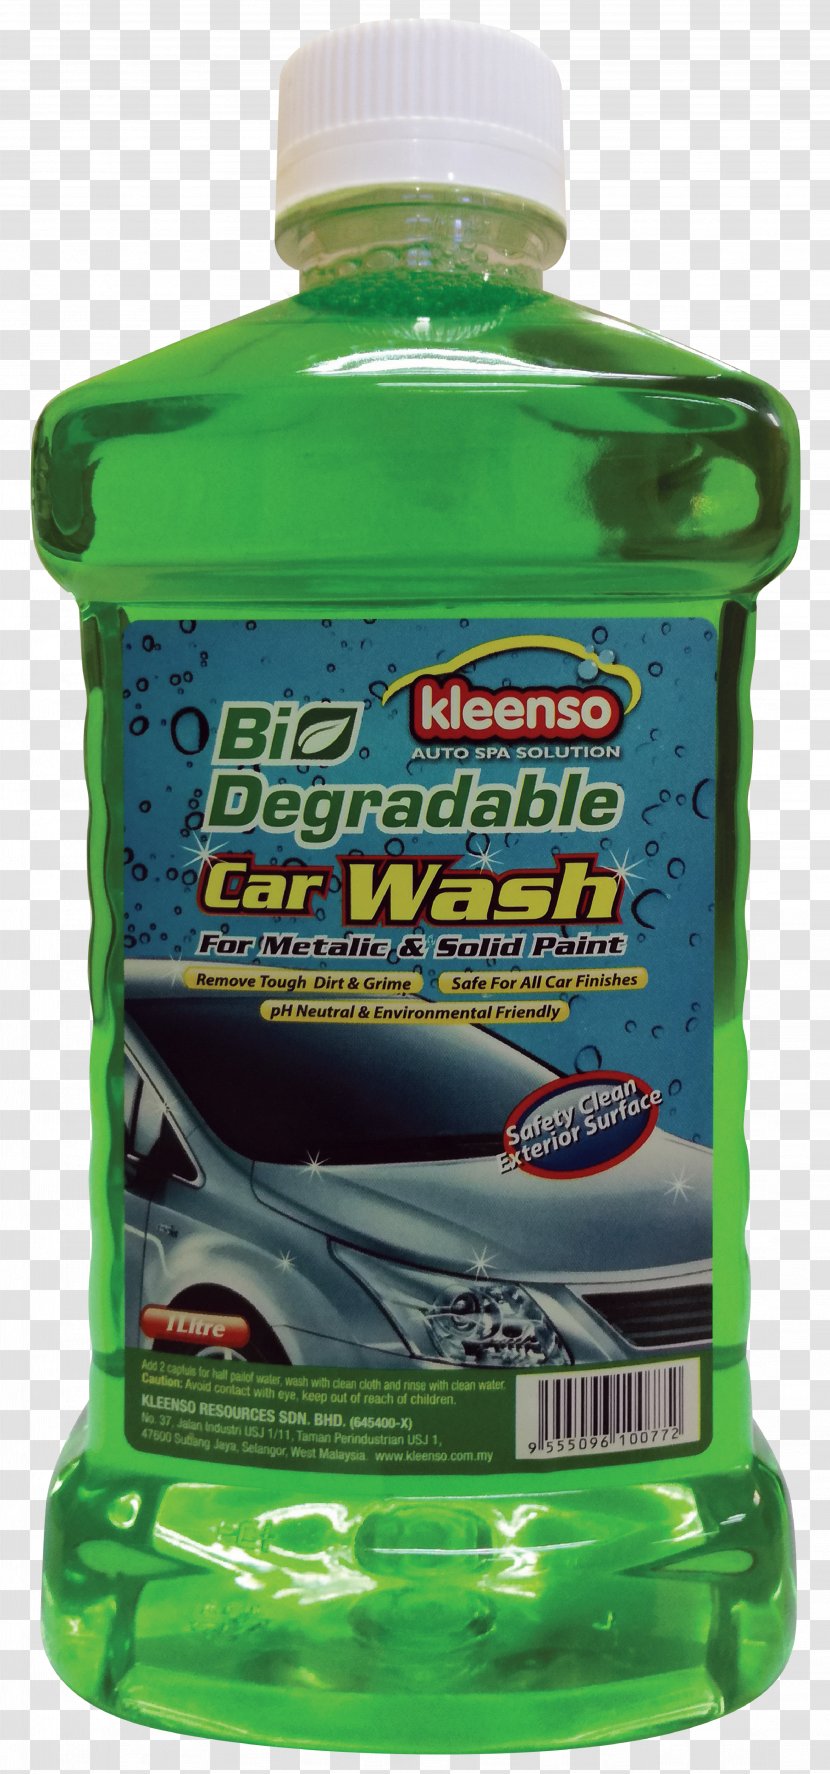 Car Wash Cleaning Washing Kleenso Resources Sdn. Bhd. Transparent PNG